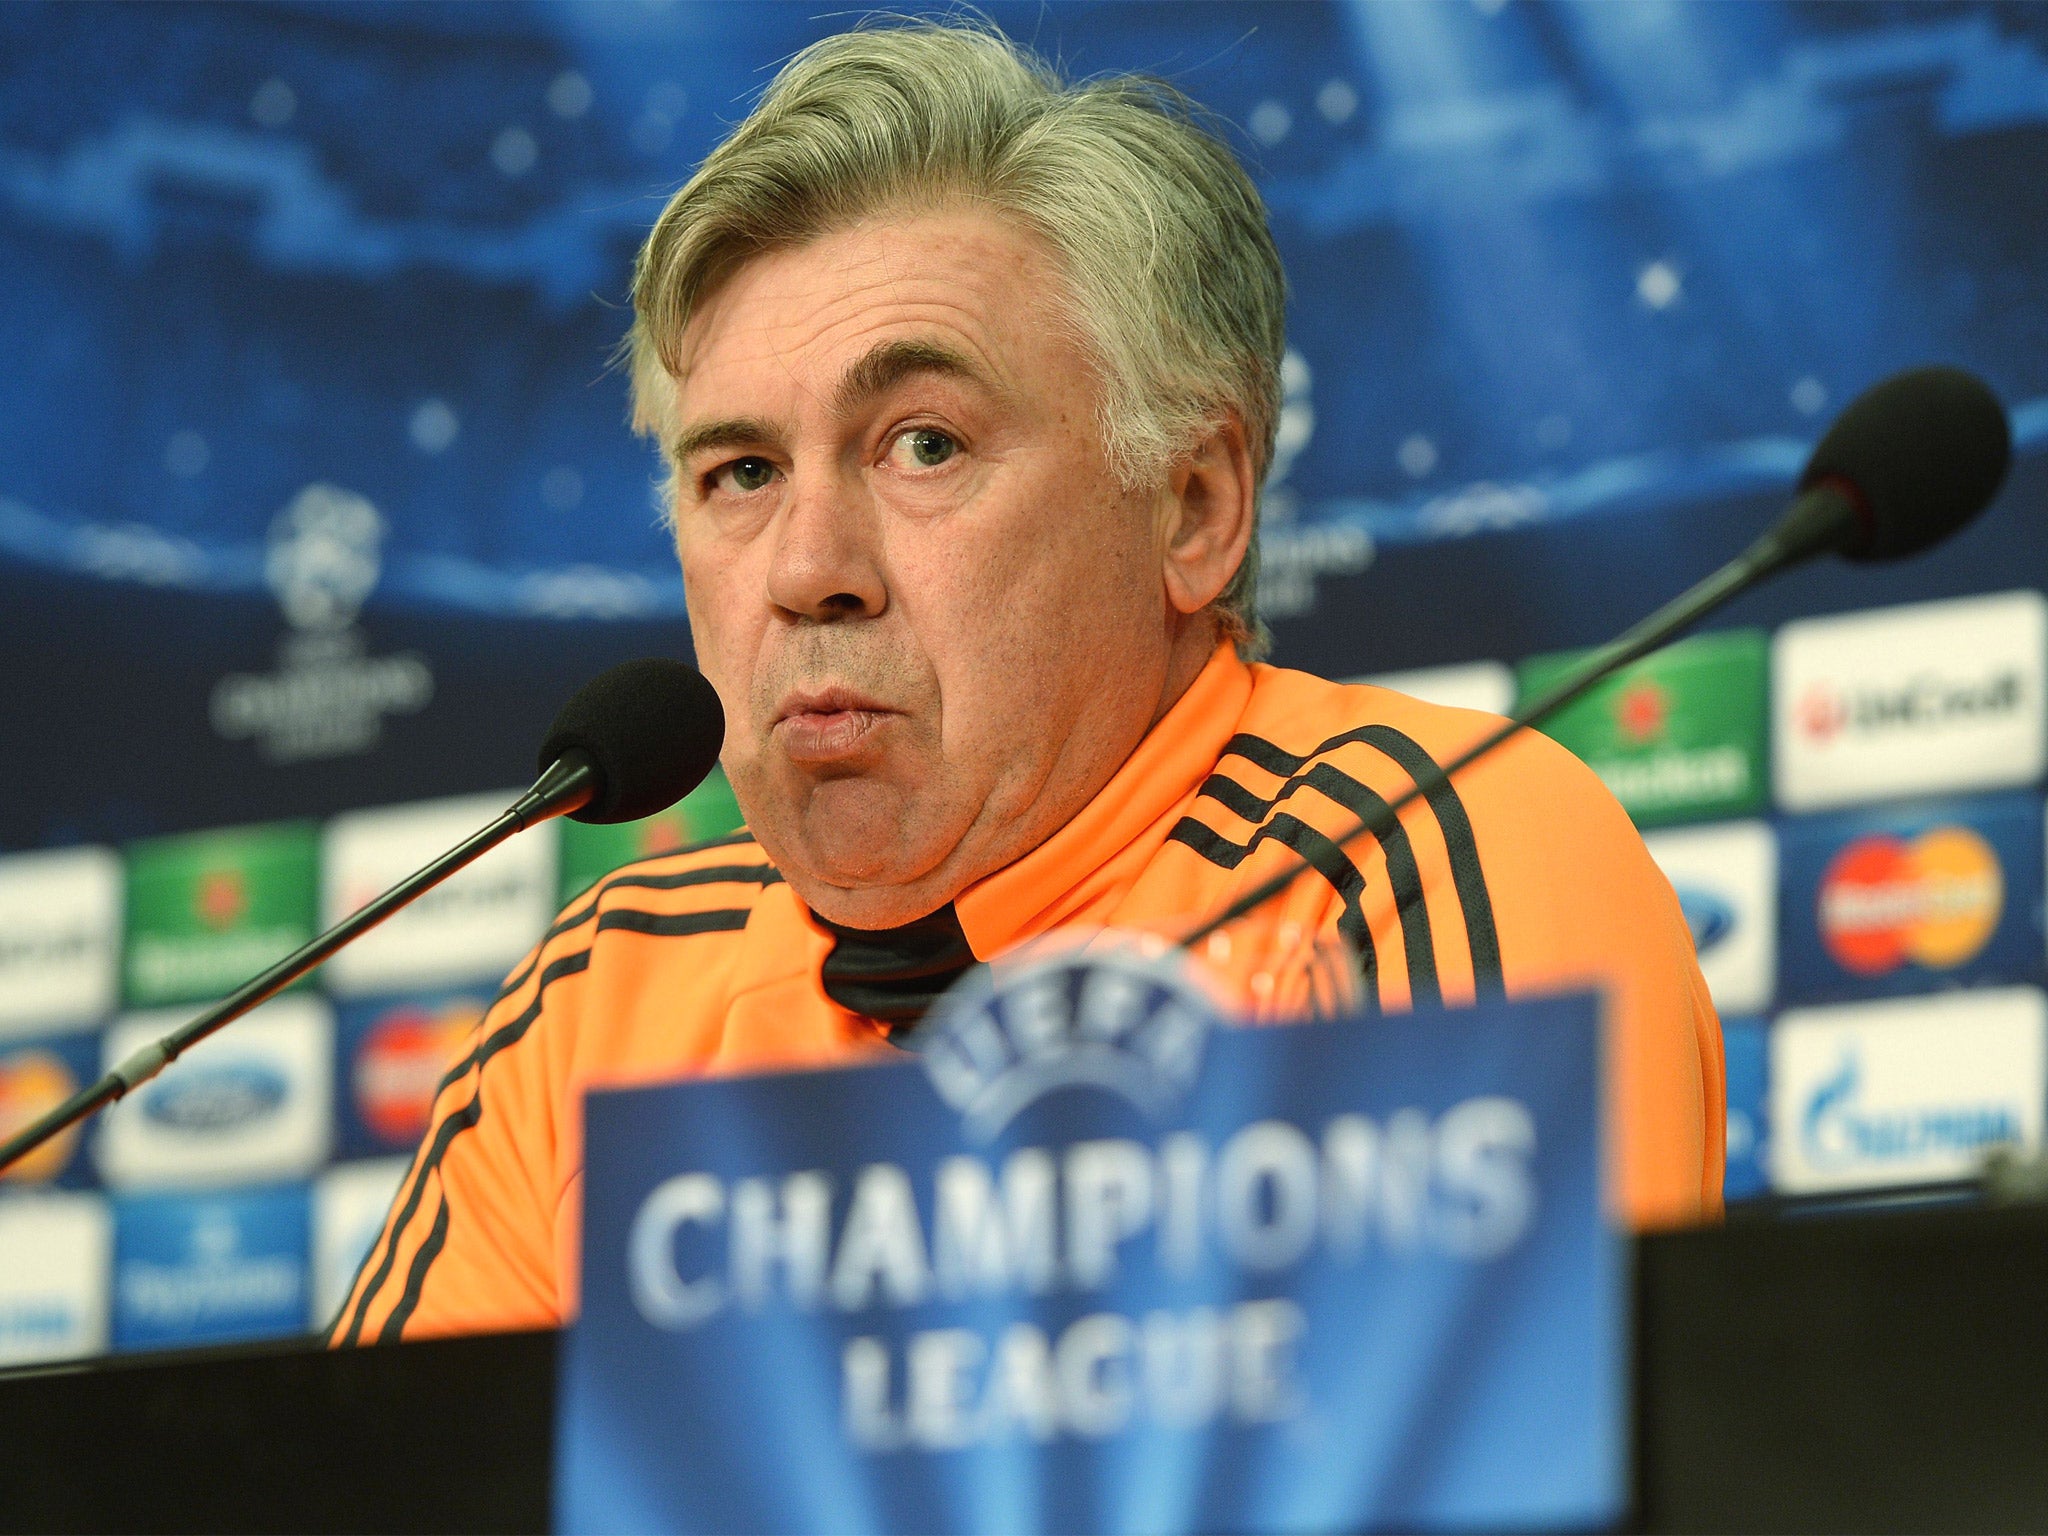 Carlo Ancelotti just won the Champions League with Real Madrid